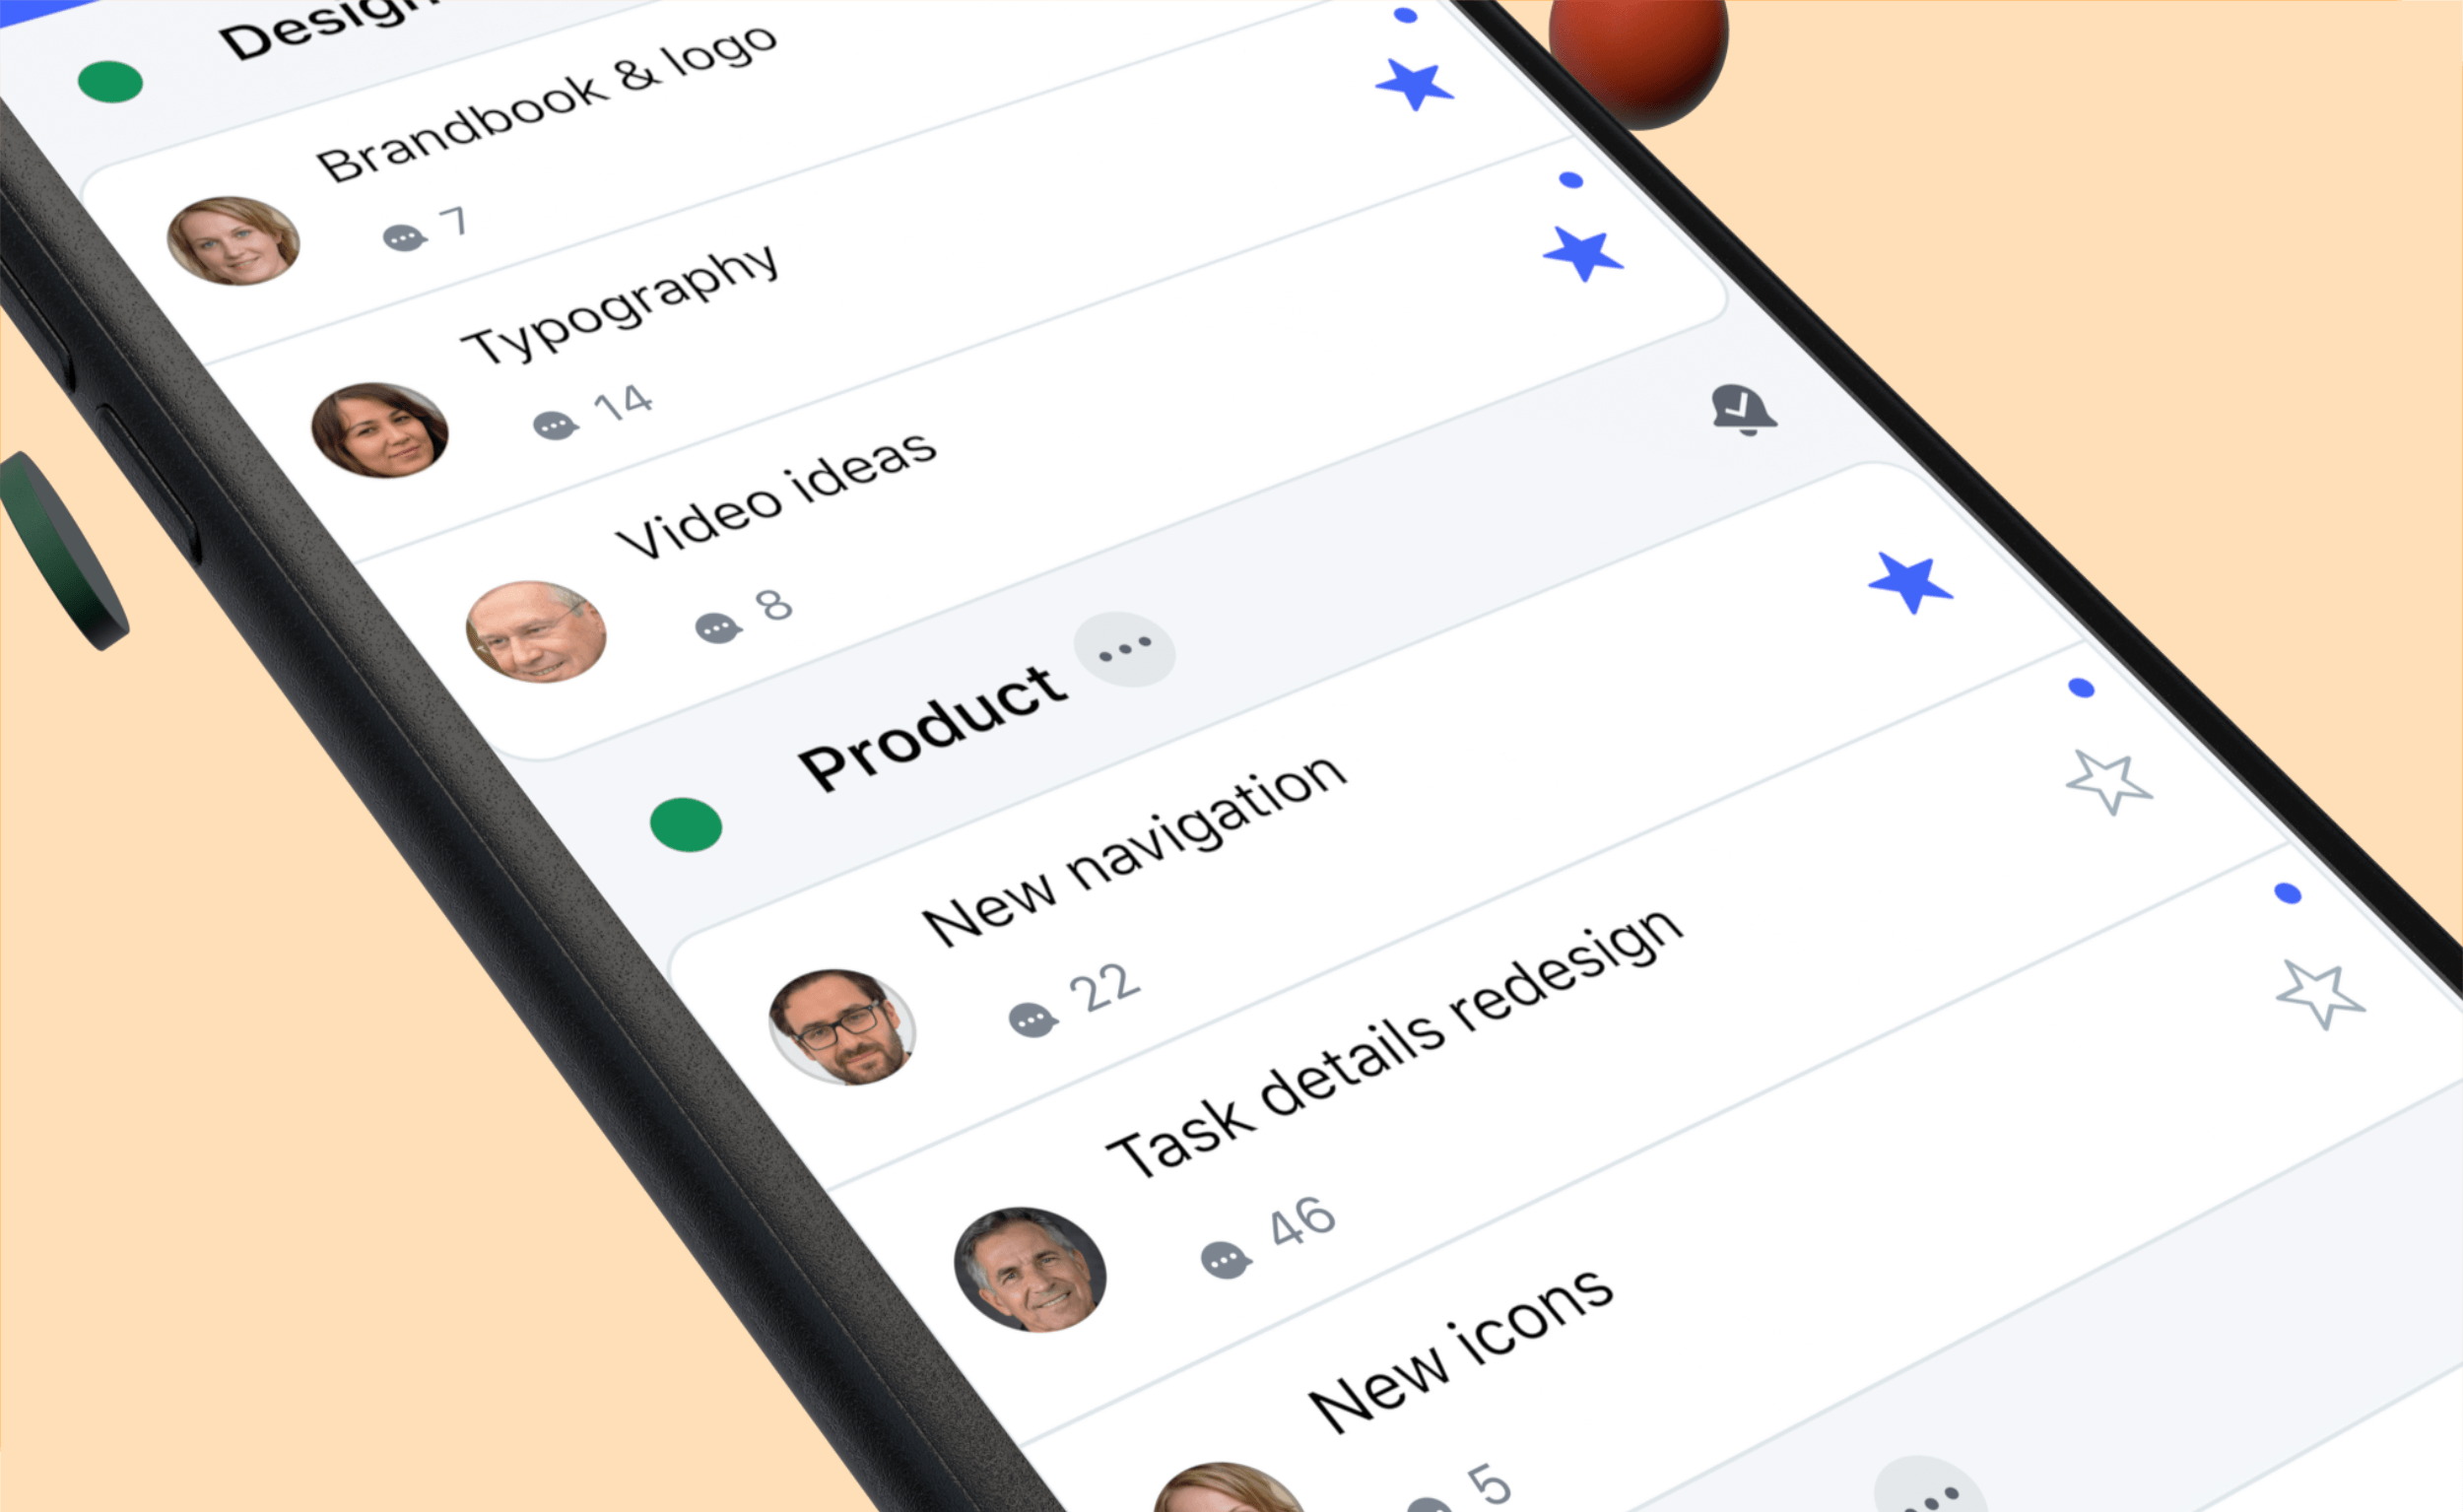 add tasks and assign people